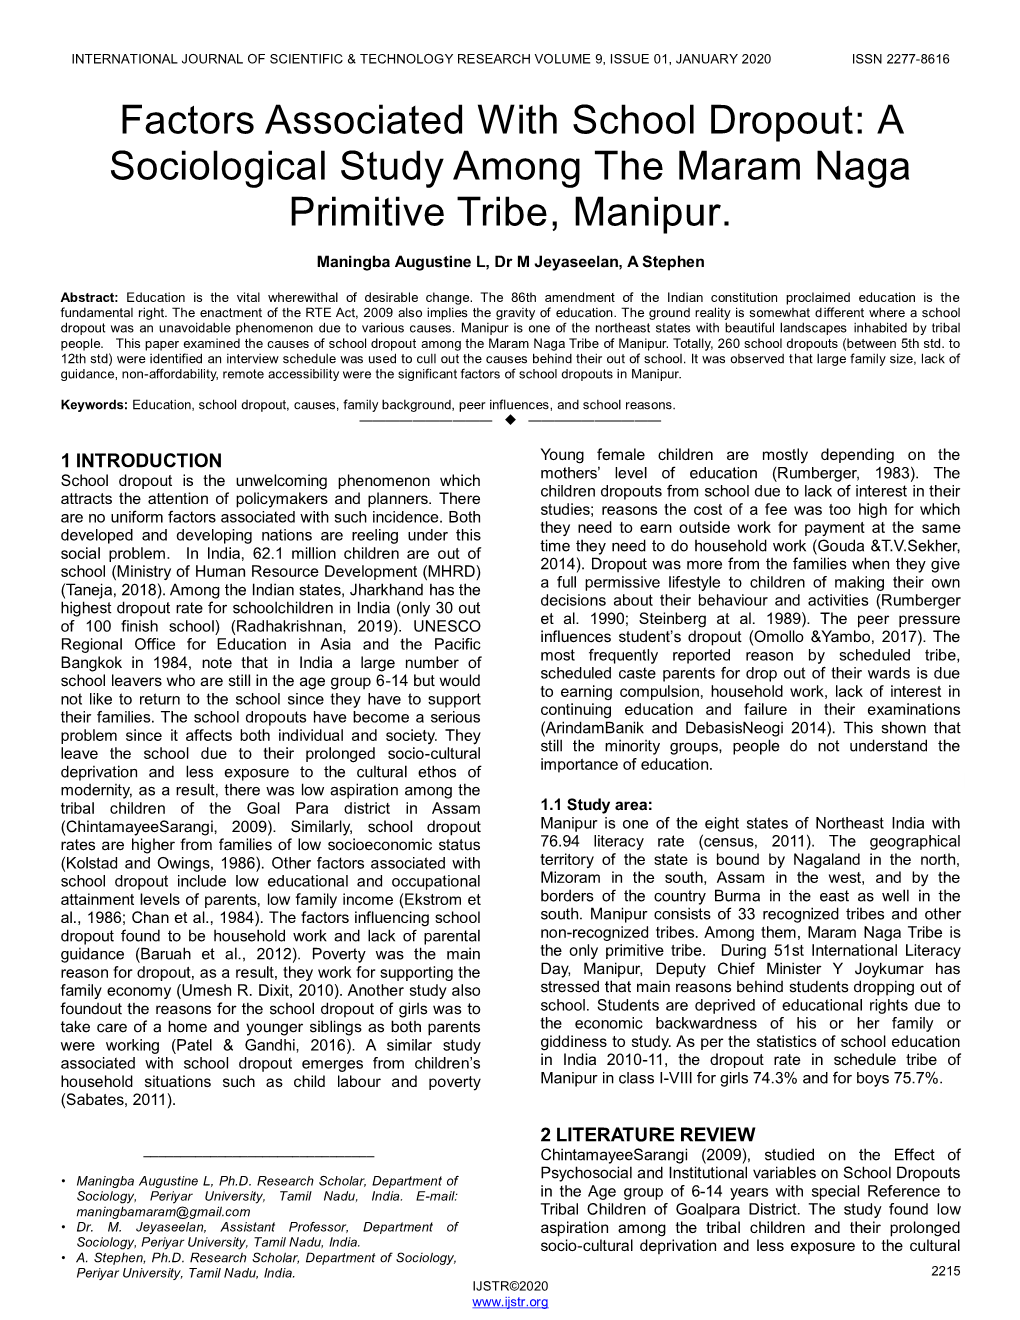 Factors Associated with School Dropout: a Sociological Study Among the Maram Naga Primitive Tribe, Manipur